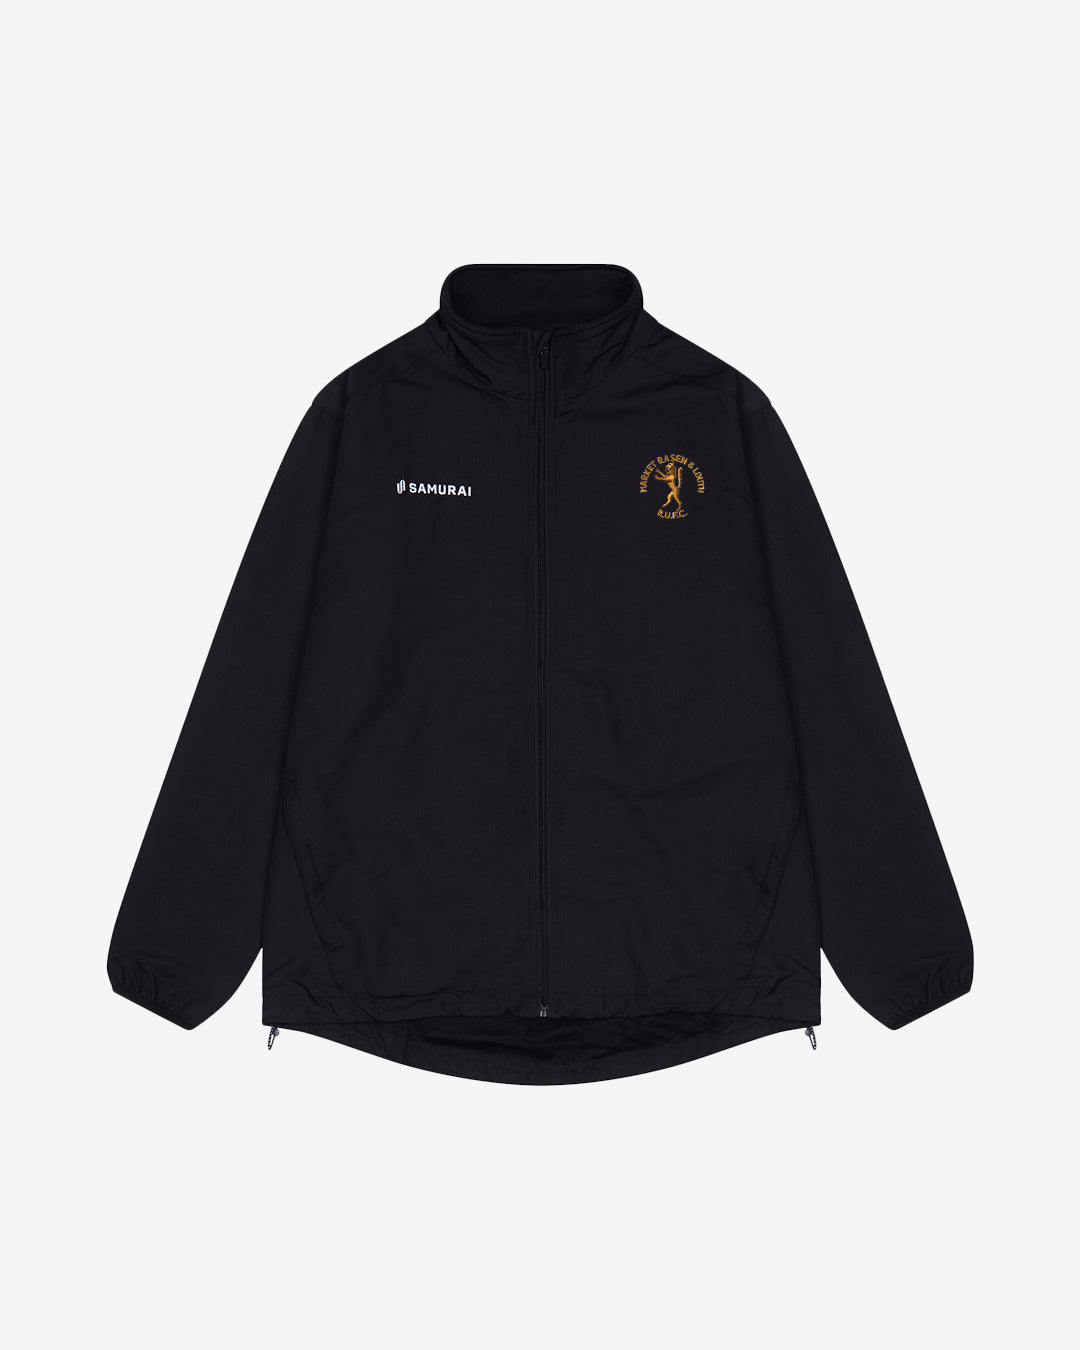 Market Rasen and Louth RUFC - EP:0102 - Revolution Track Top 2.0 - Black